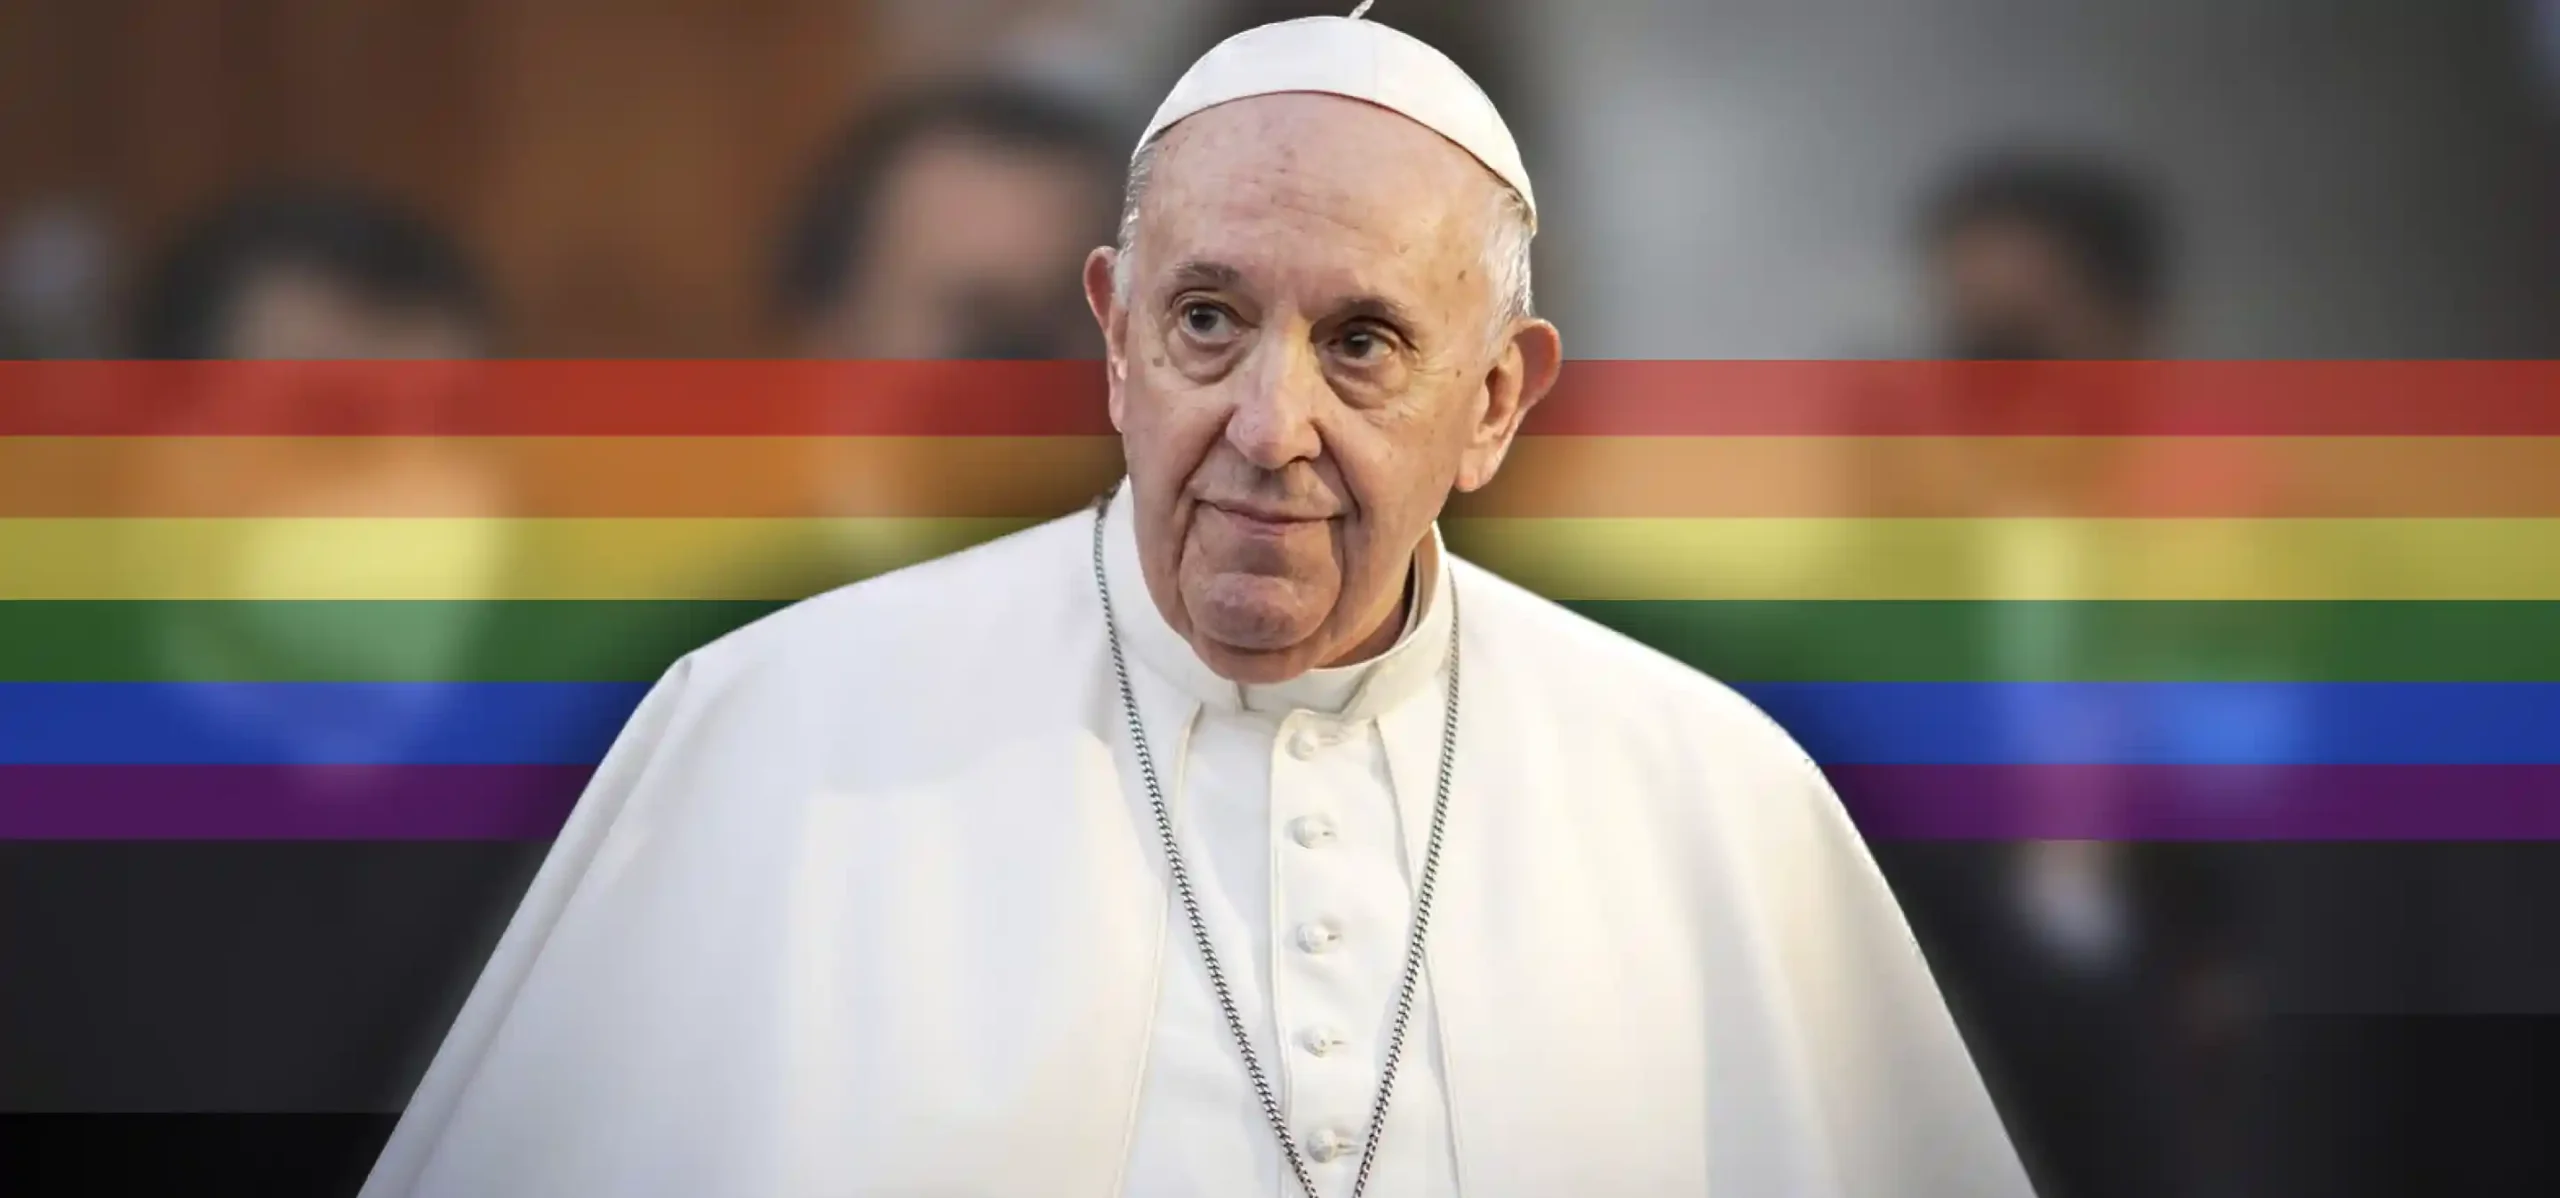 Pope Francis Restates Church's Openness to All Including LGBTQ